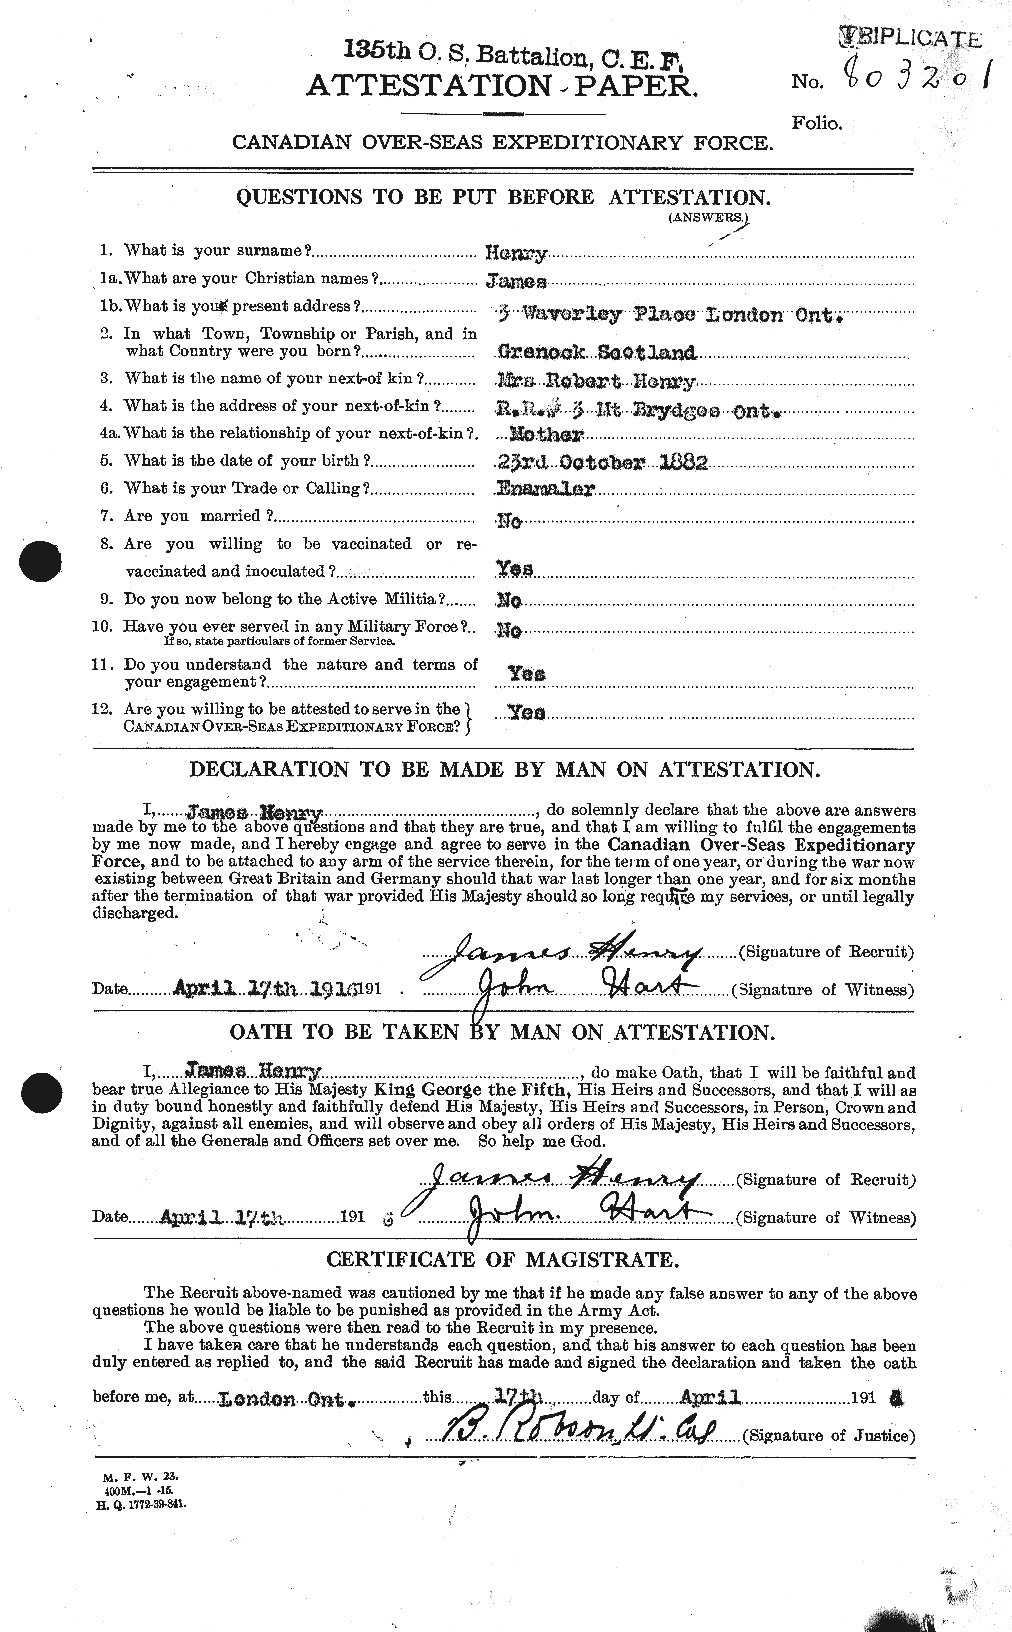 Personnel Records of the First World War - CEF 387587a